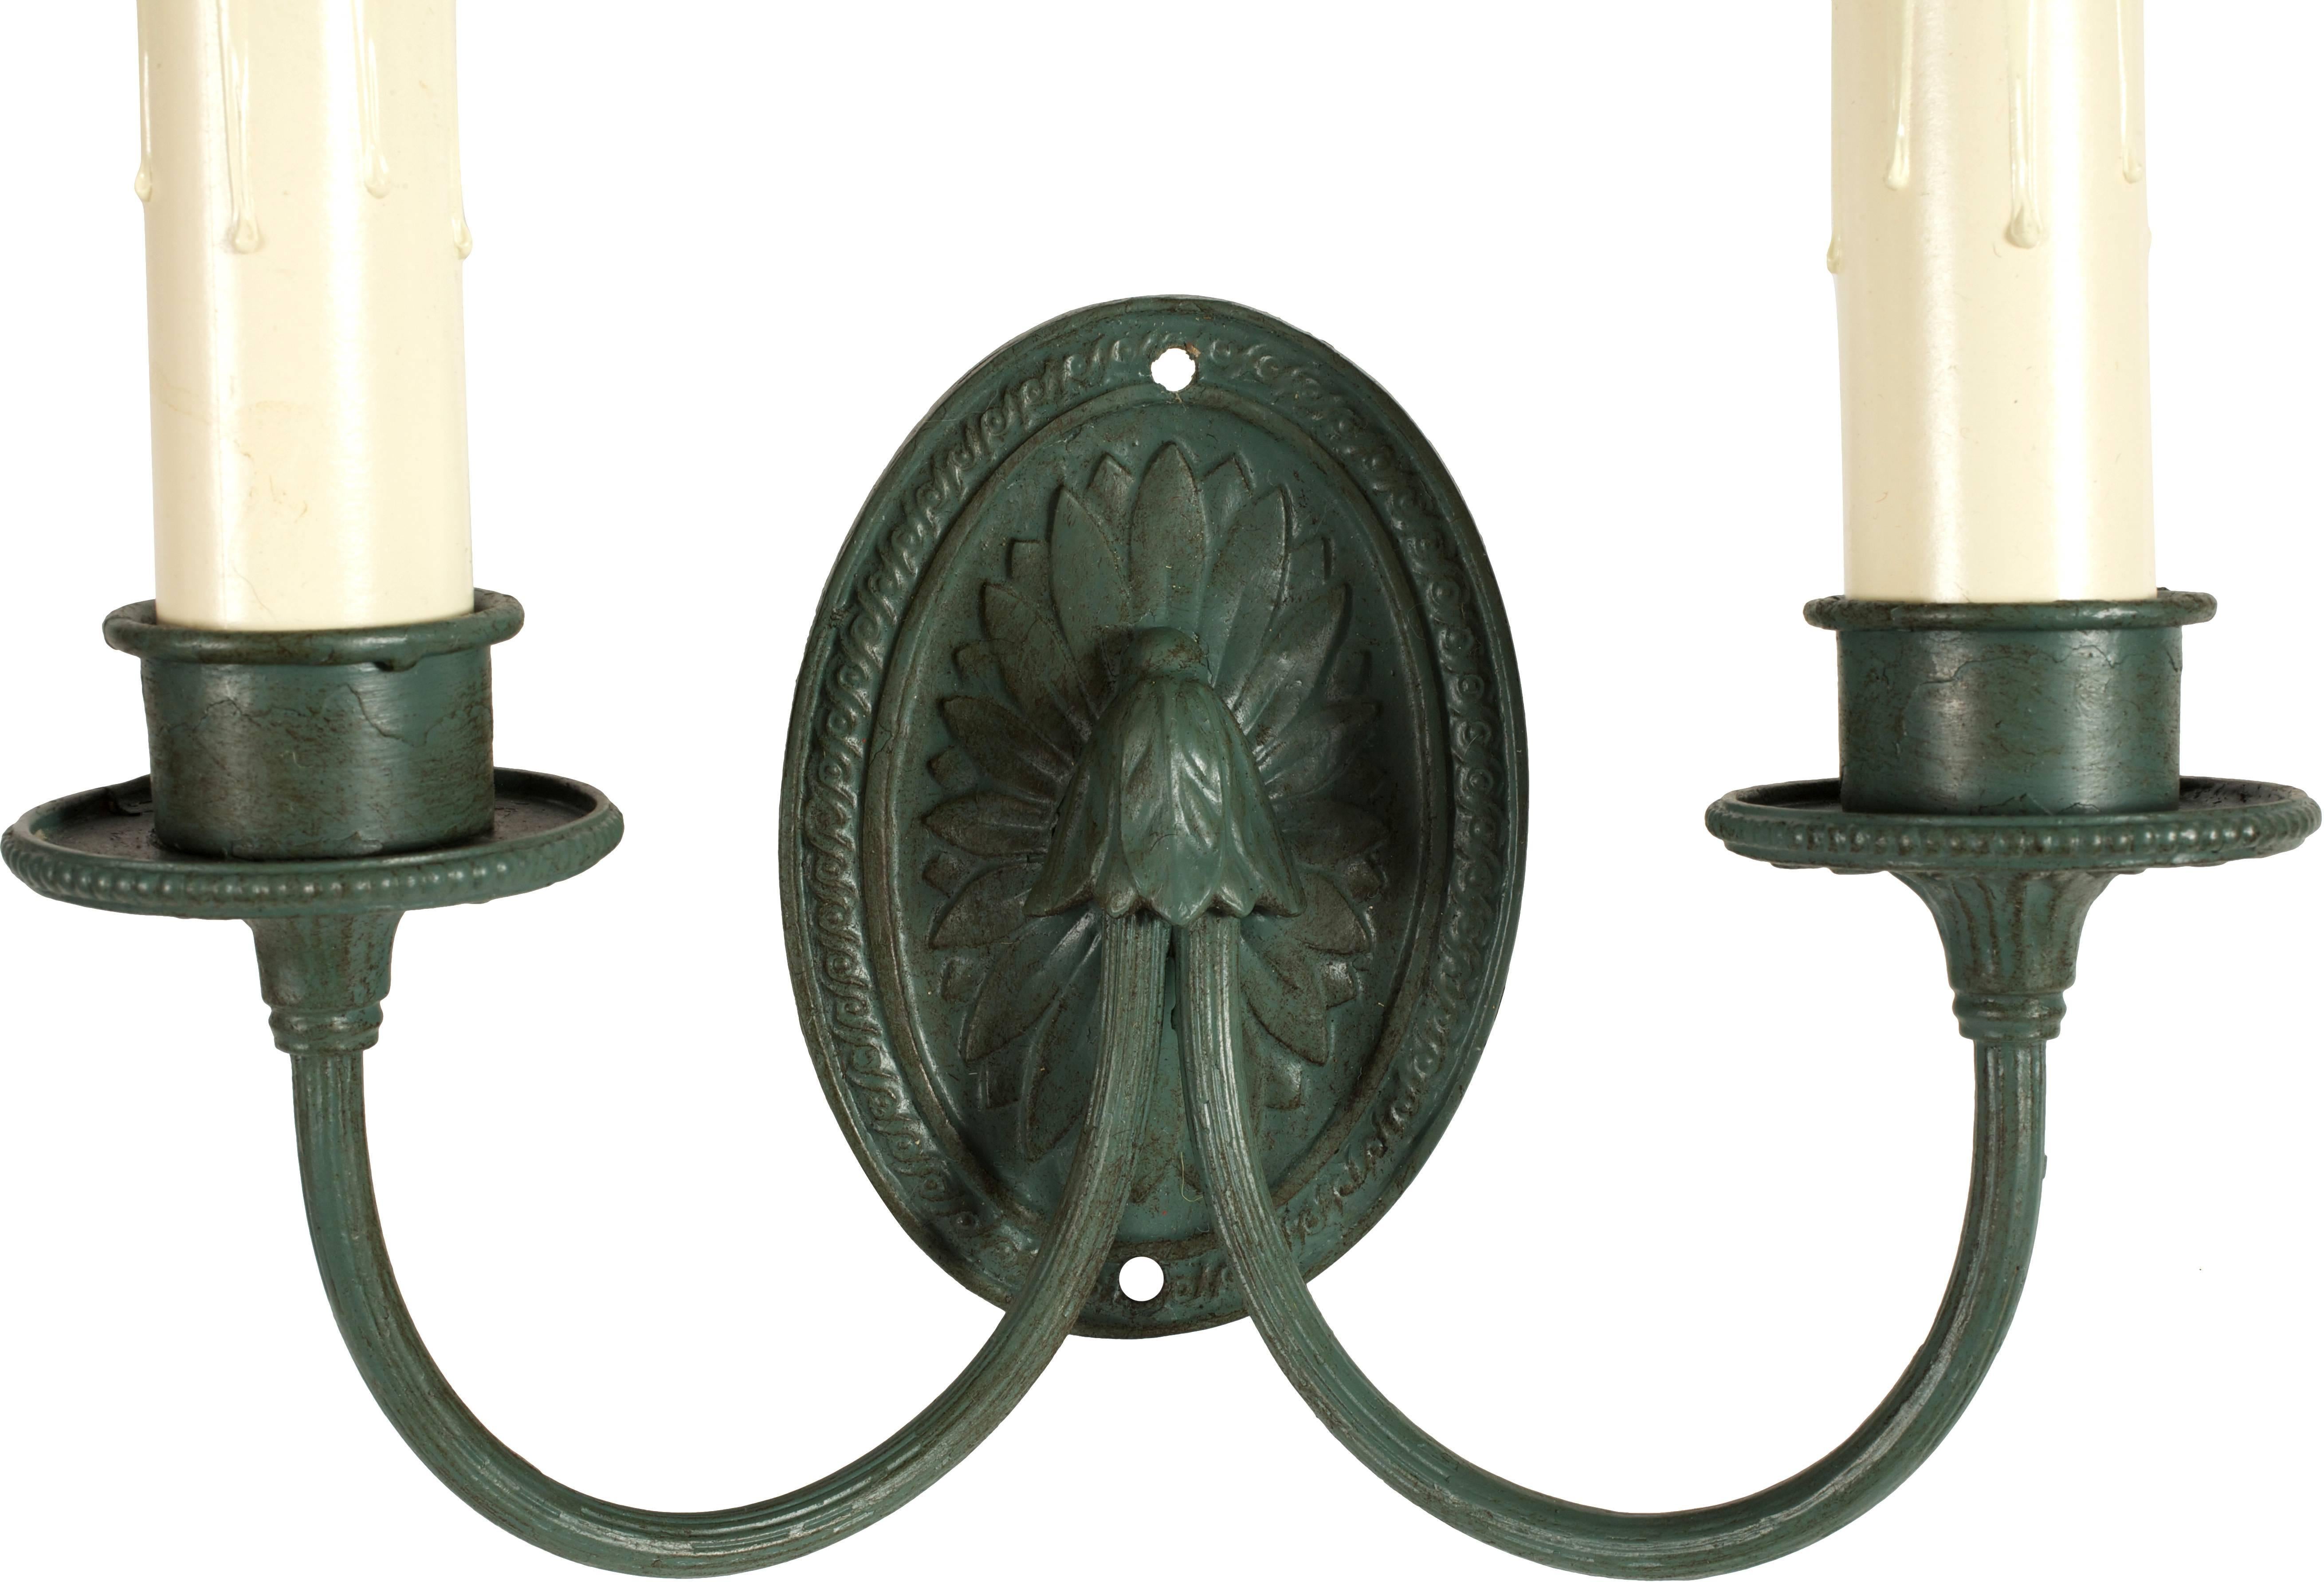 Adamesque in style, this green cast-metal sconce features two curving arms attached to an oval decorated with leaves. Newly wired for US use.